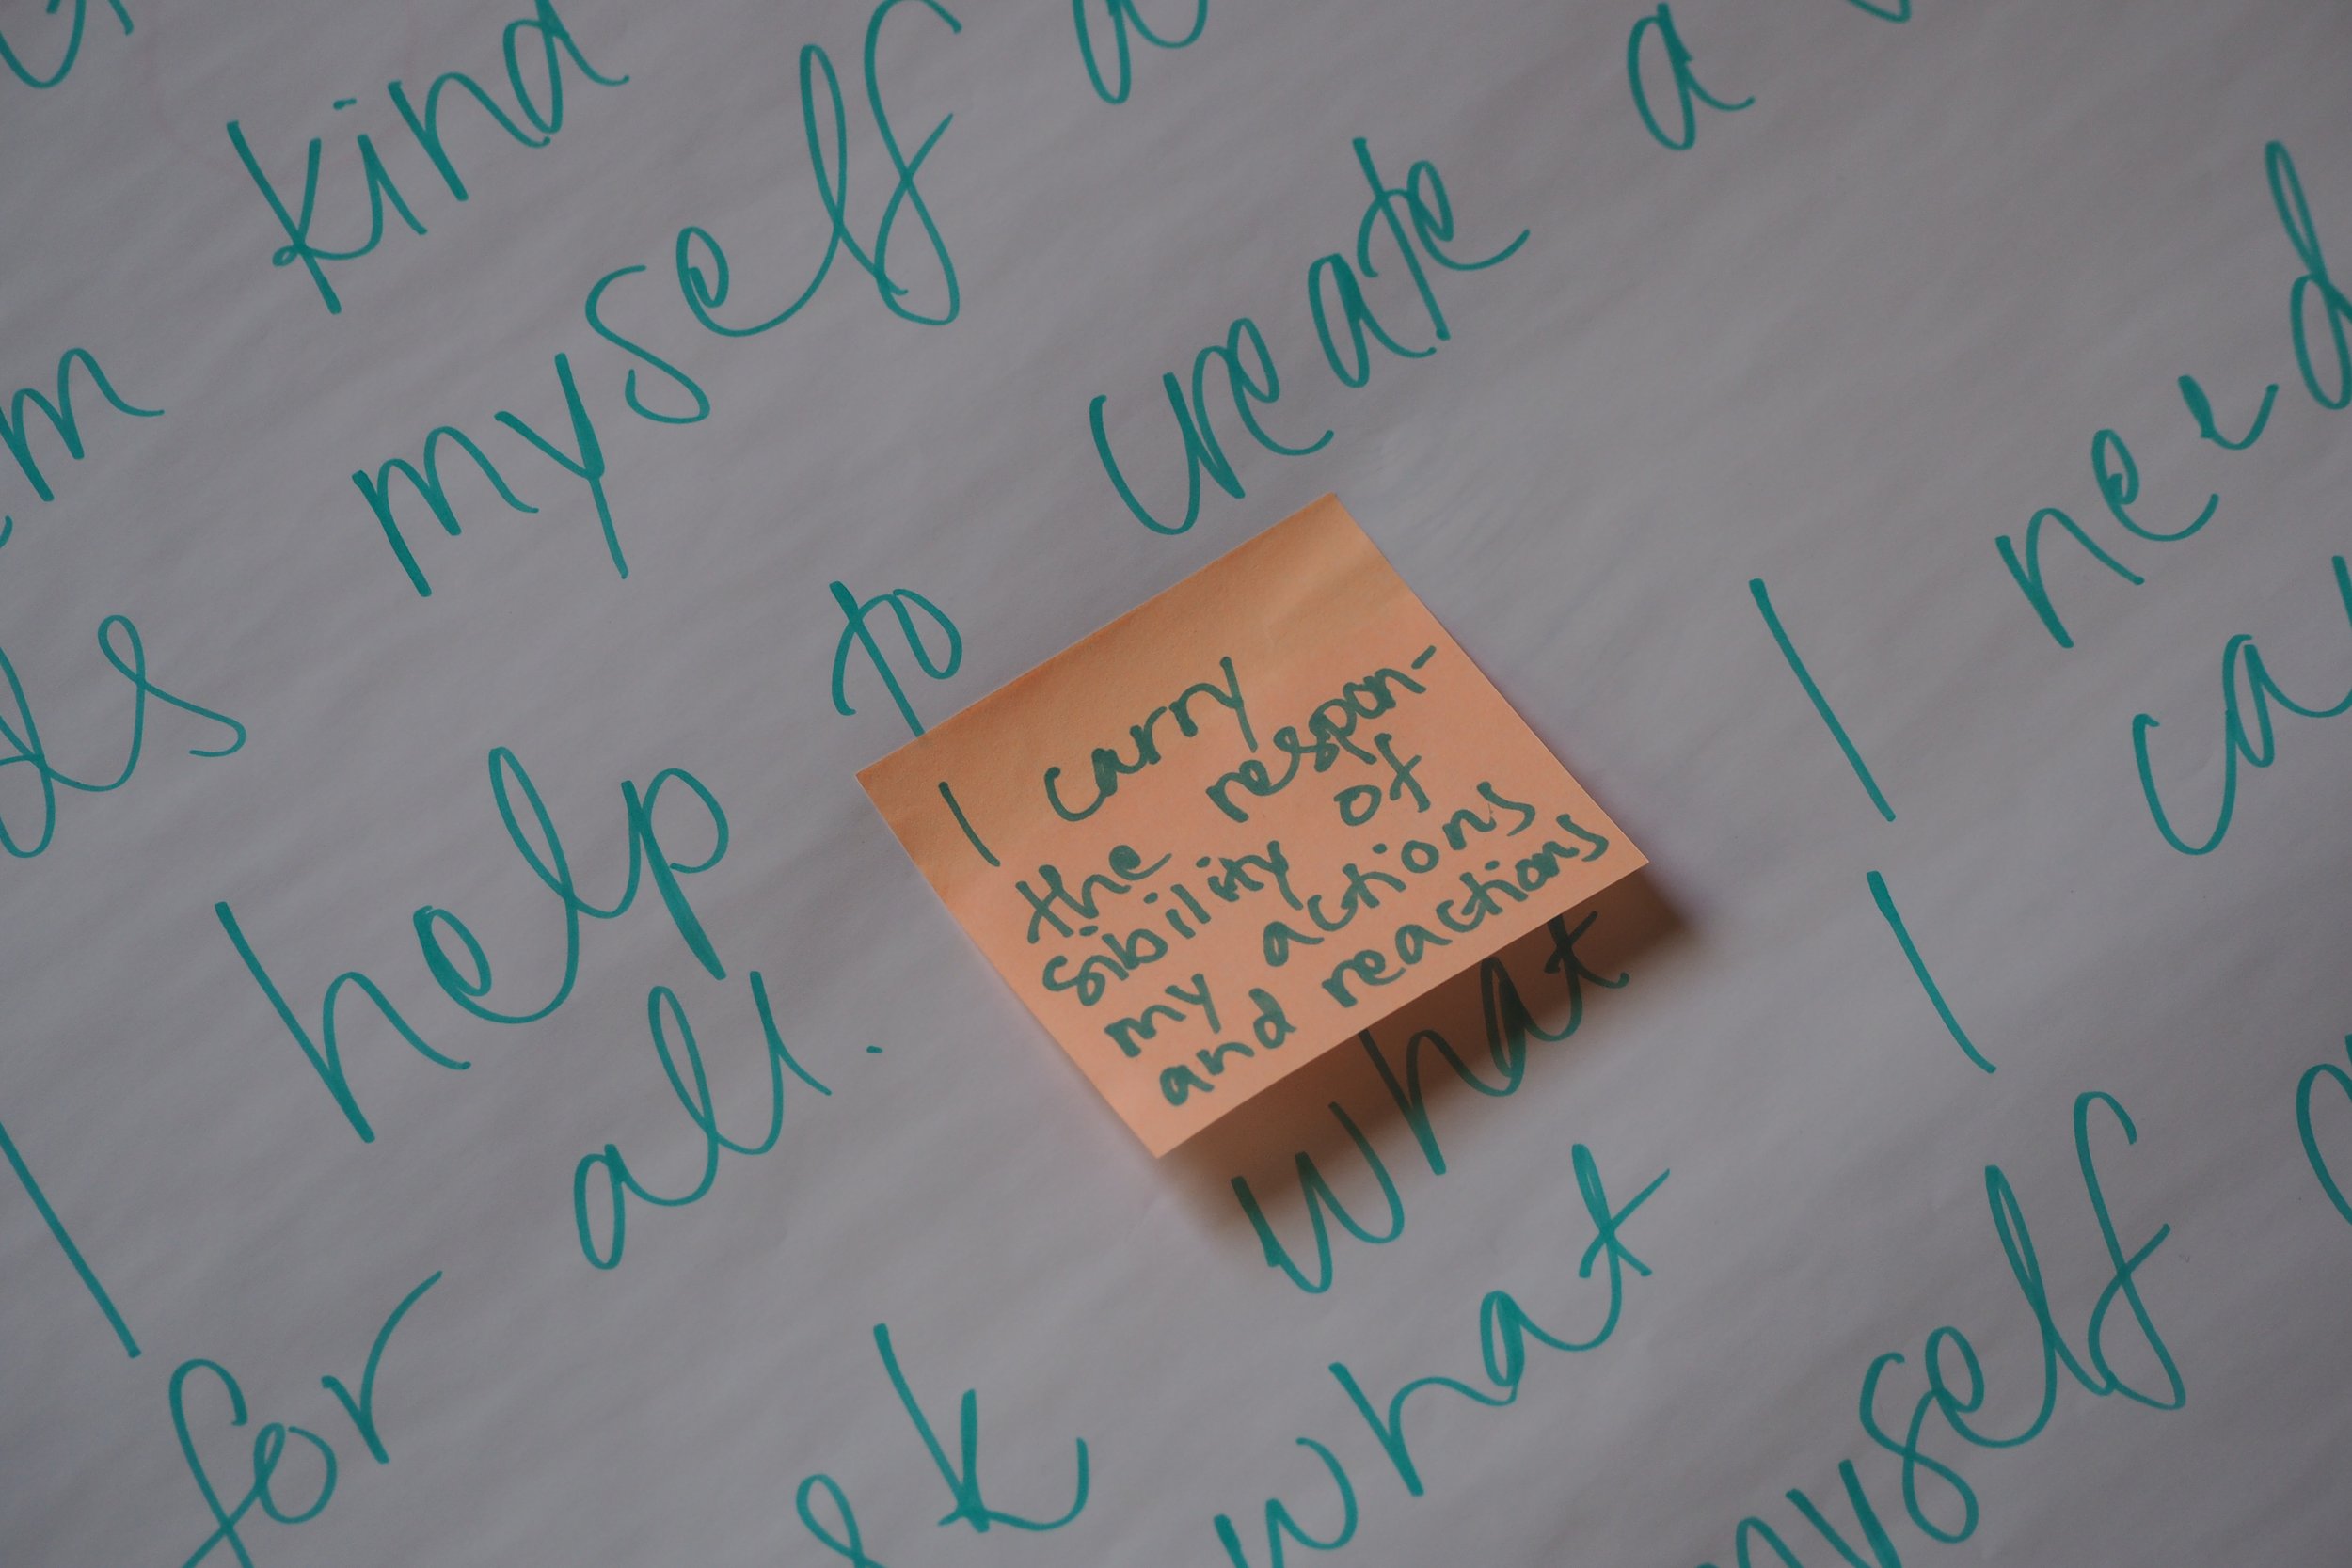  A post-it addition to the co-created intentions for the weekend 